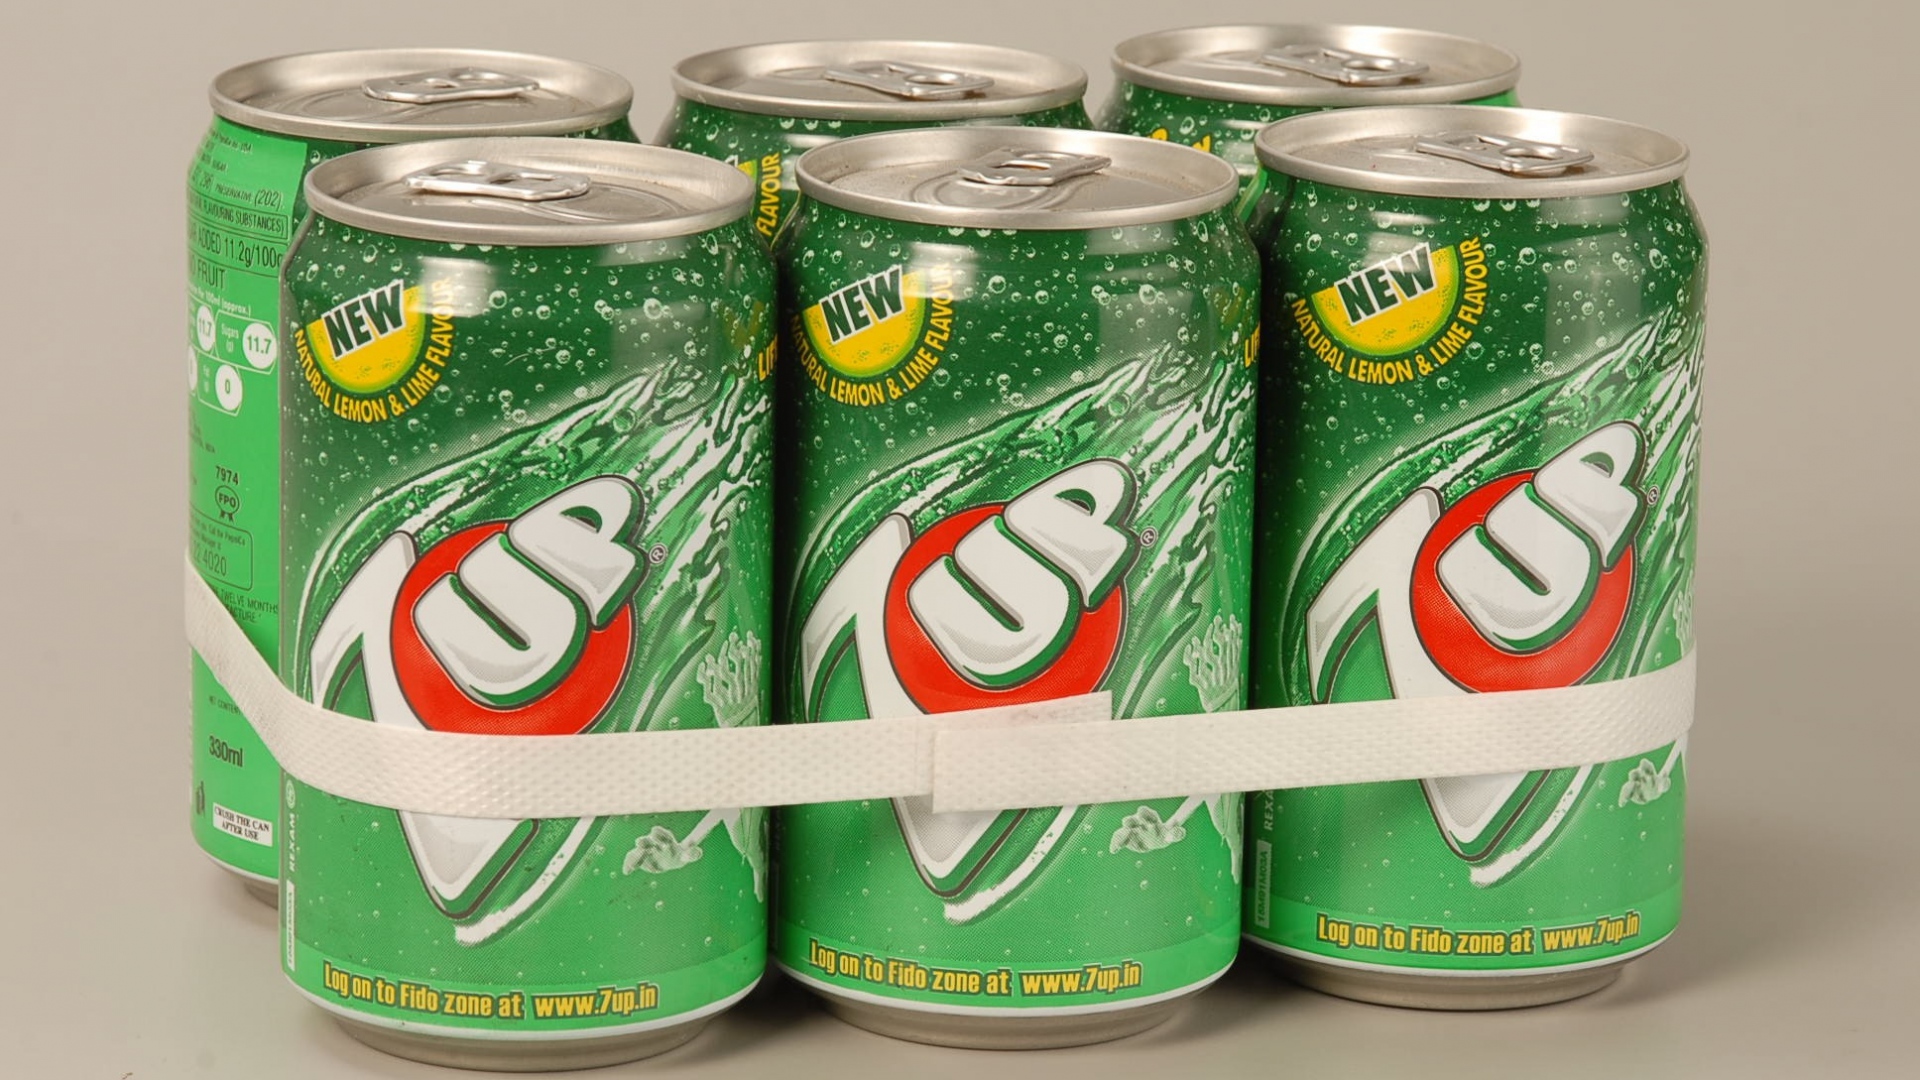 products, 7up